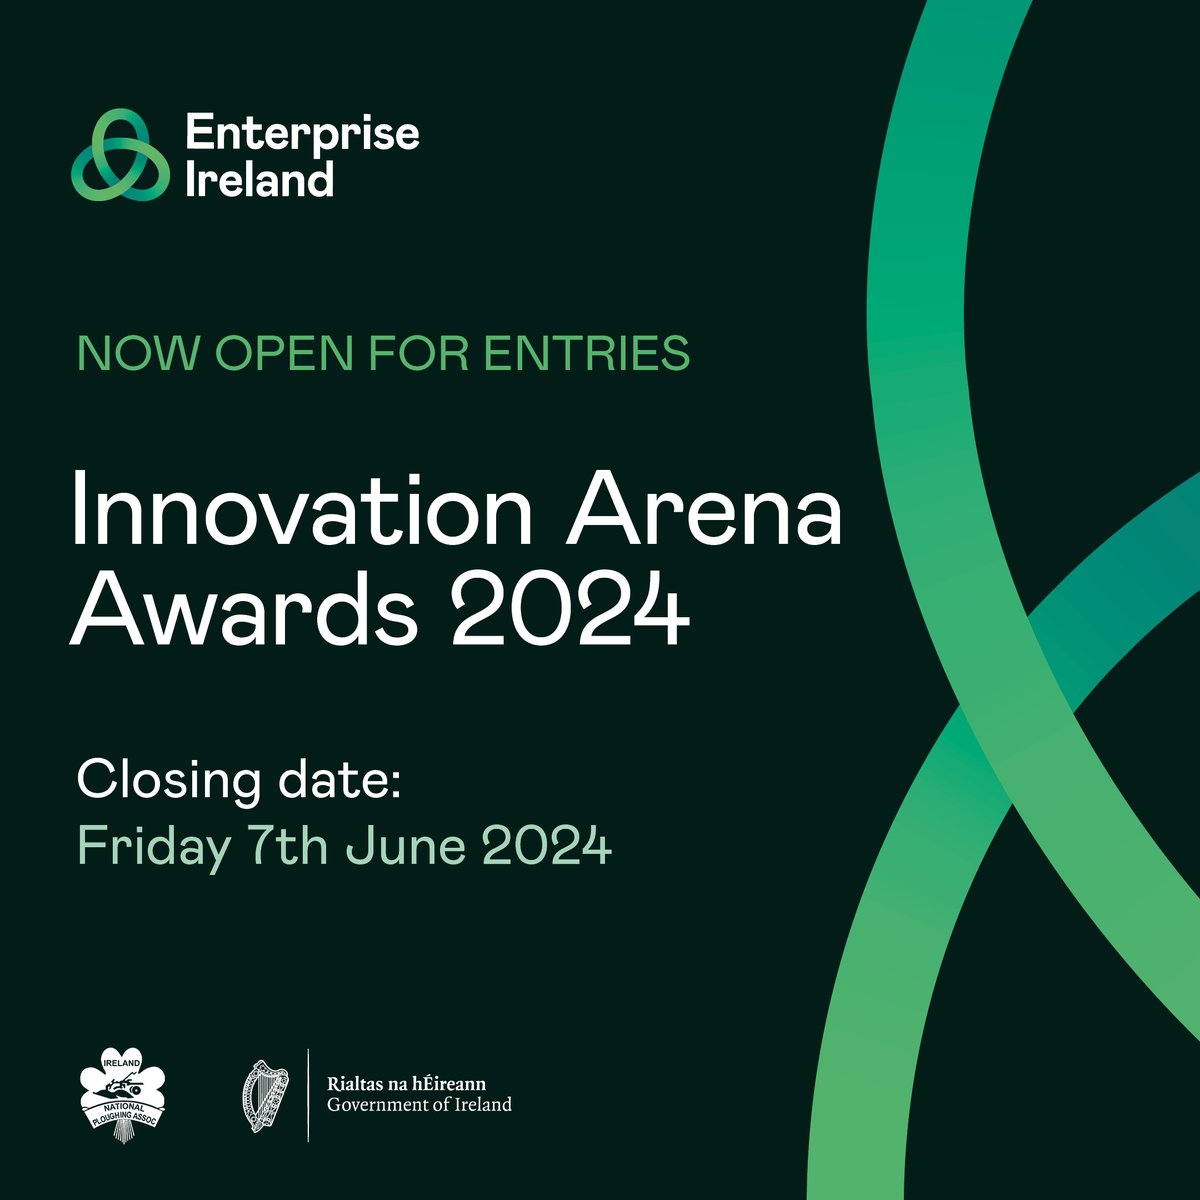 Applications are now open for Enterprise Ireland’s 2024 Innovation Arena Awards in partnership with @NPAIE. Short-listed applicants will be invited to showcase their agri solutions at the Innovation Arena from 17 -19 September 2024. Find out more: rebrand.ly/I-A-24